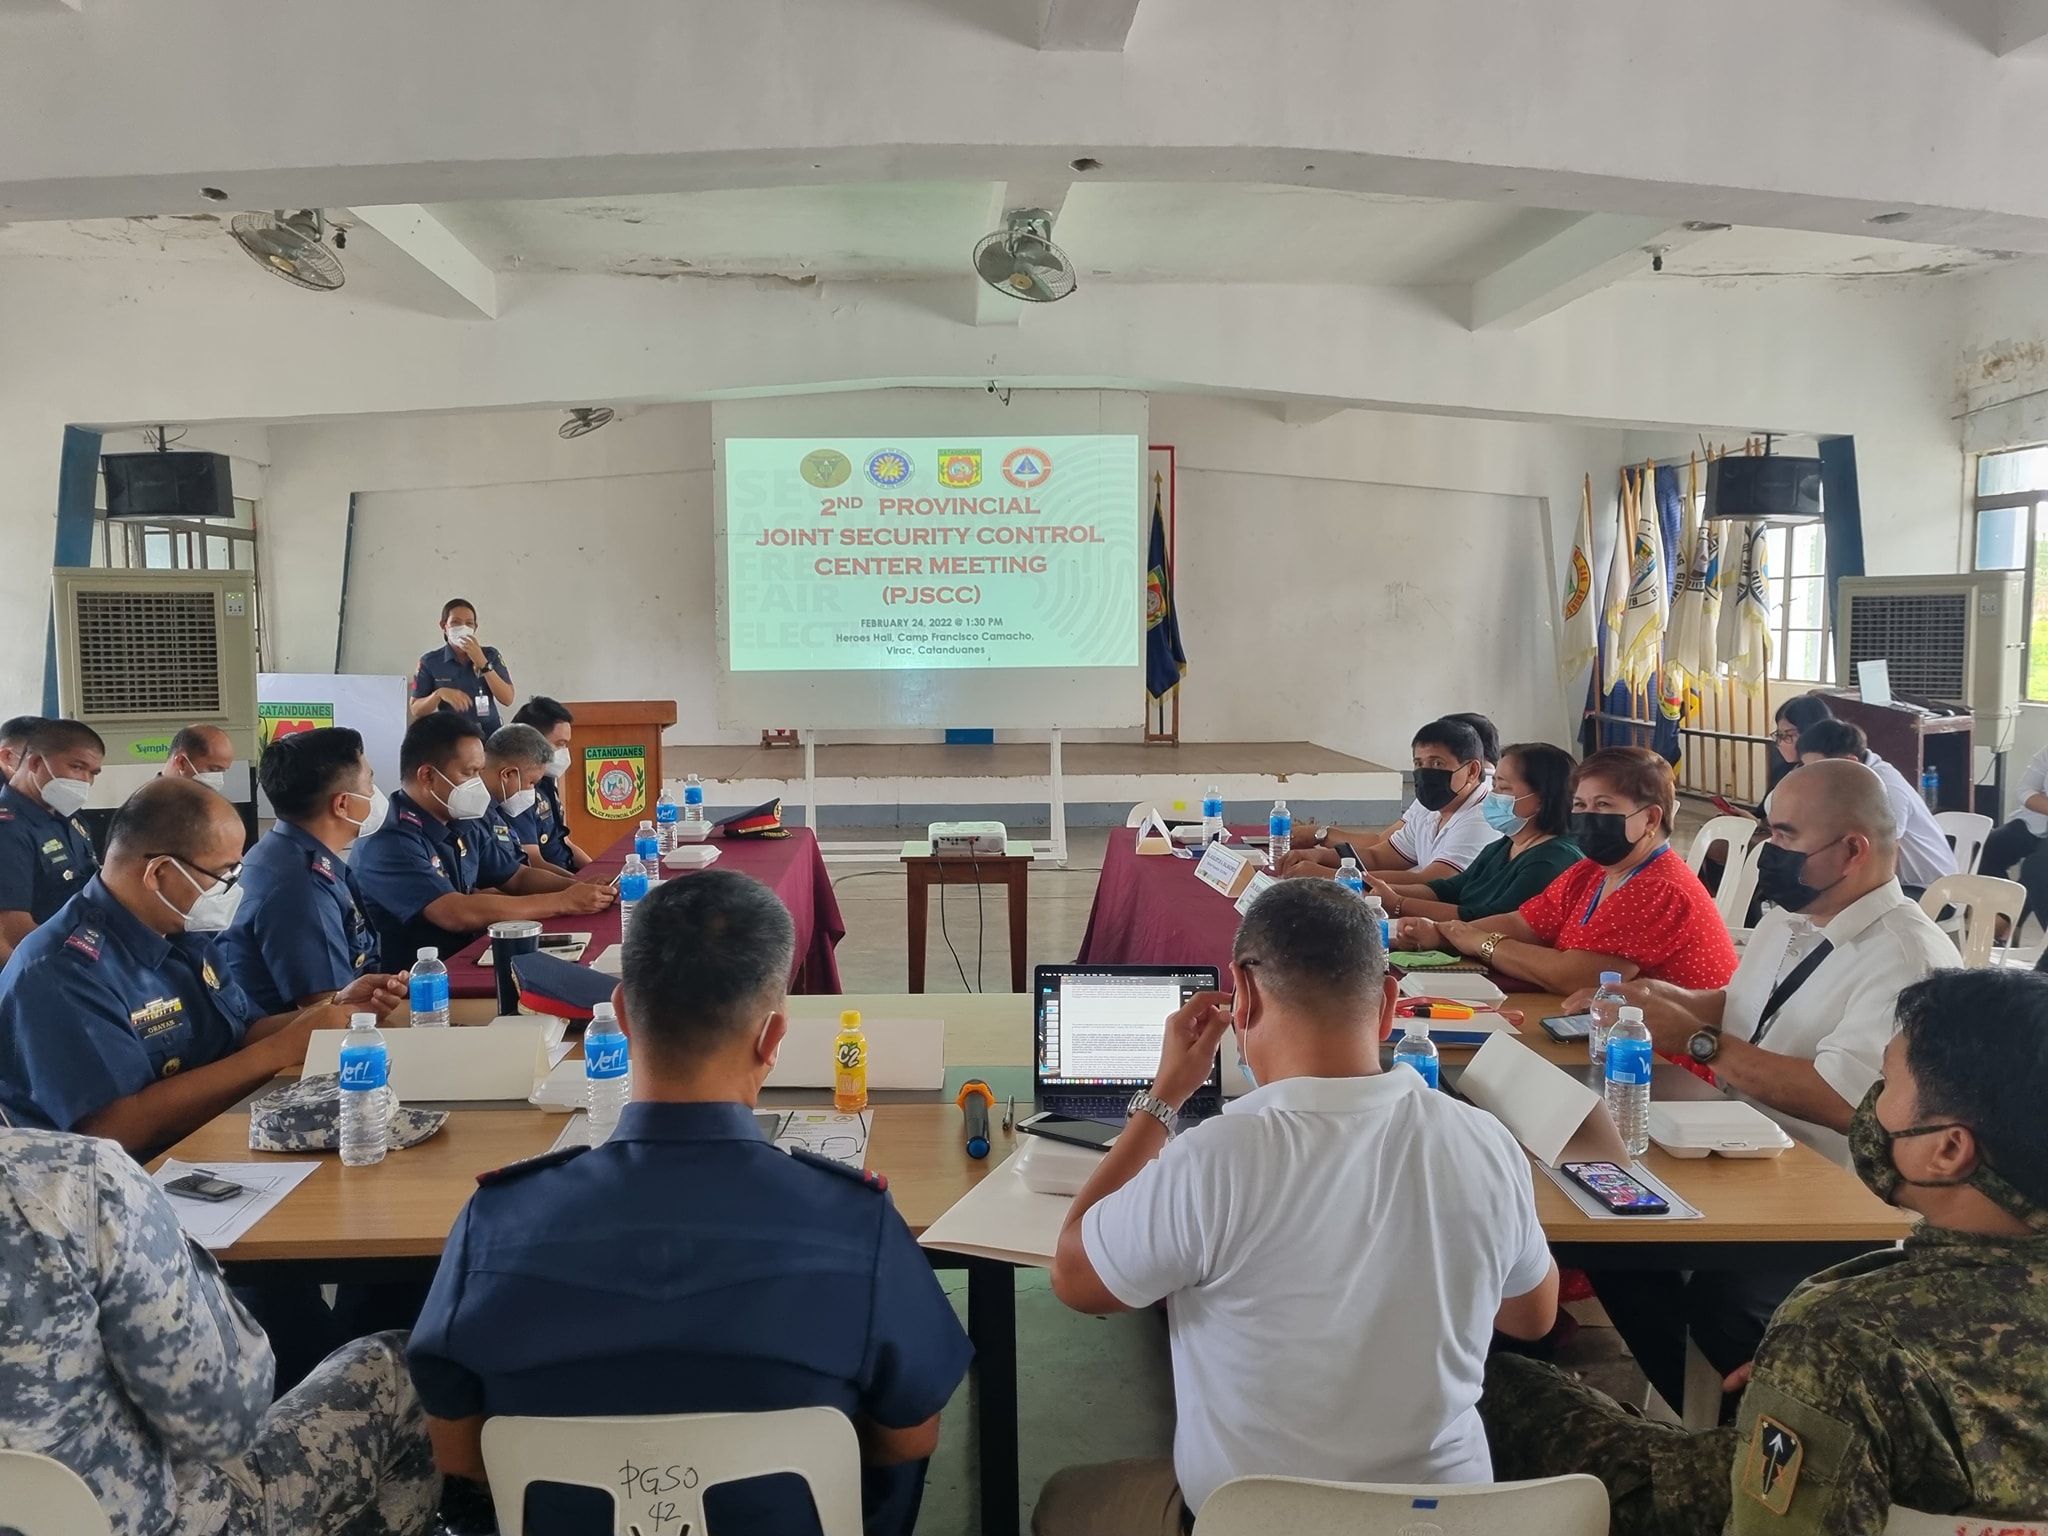 PNP holds Security Control Center meeting